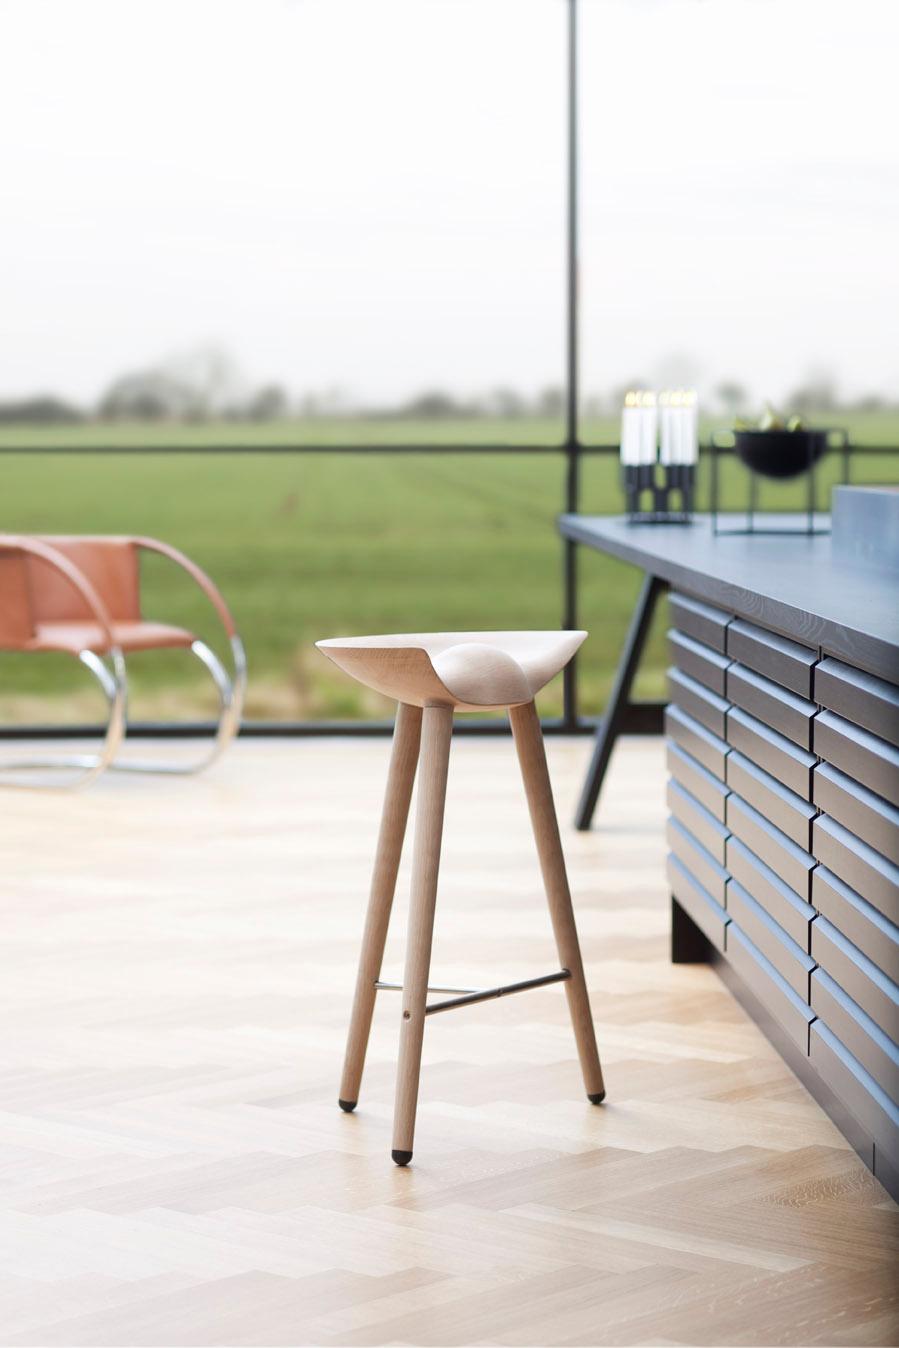 Brown oak and stainless steel bar stool by Lassen
Dimensions: H 77 x W 36 x L 55.5 cm
Materials: Oak, Stainless Steel

In 1942 Mogens Lassen designed the Stool ML42 as a piece for a furniture exhibition held at the Danish Museum of Decorative